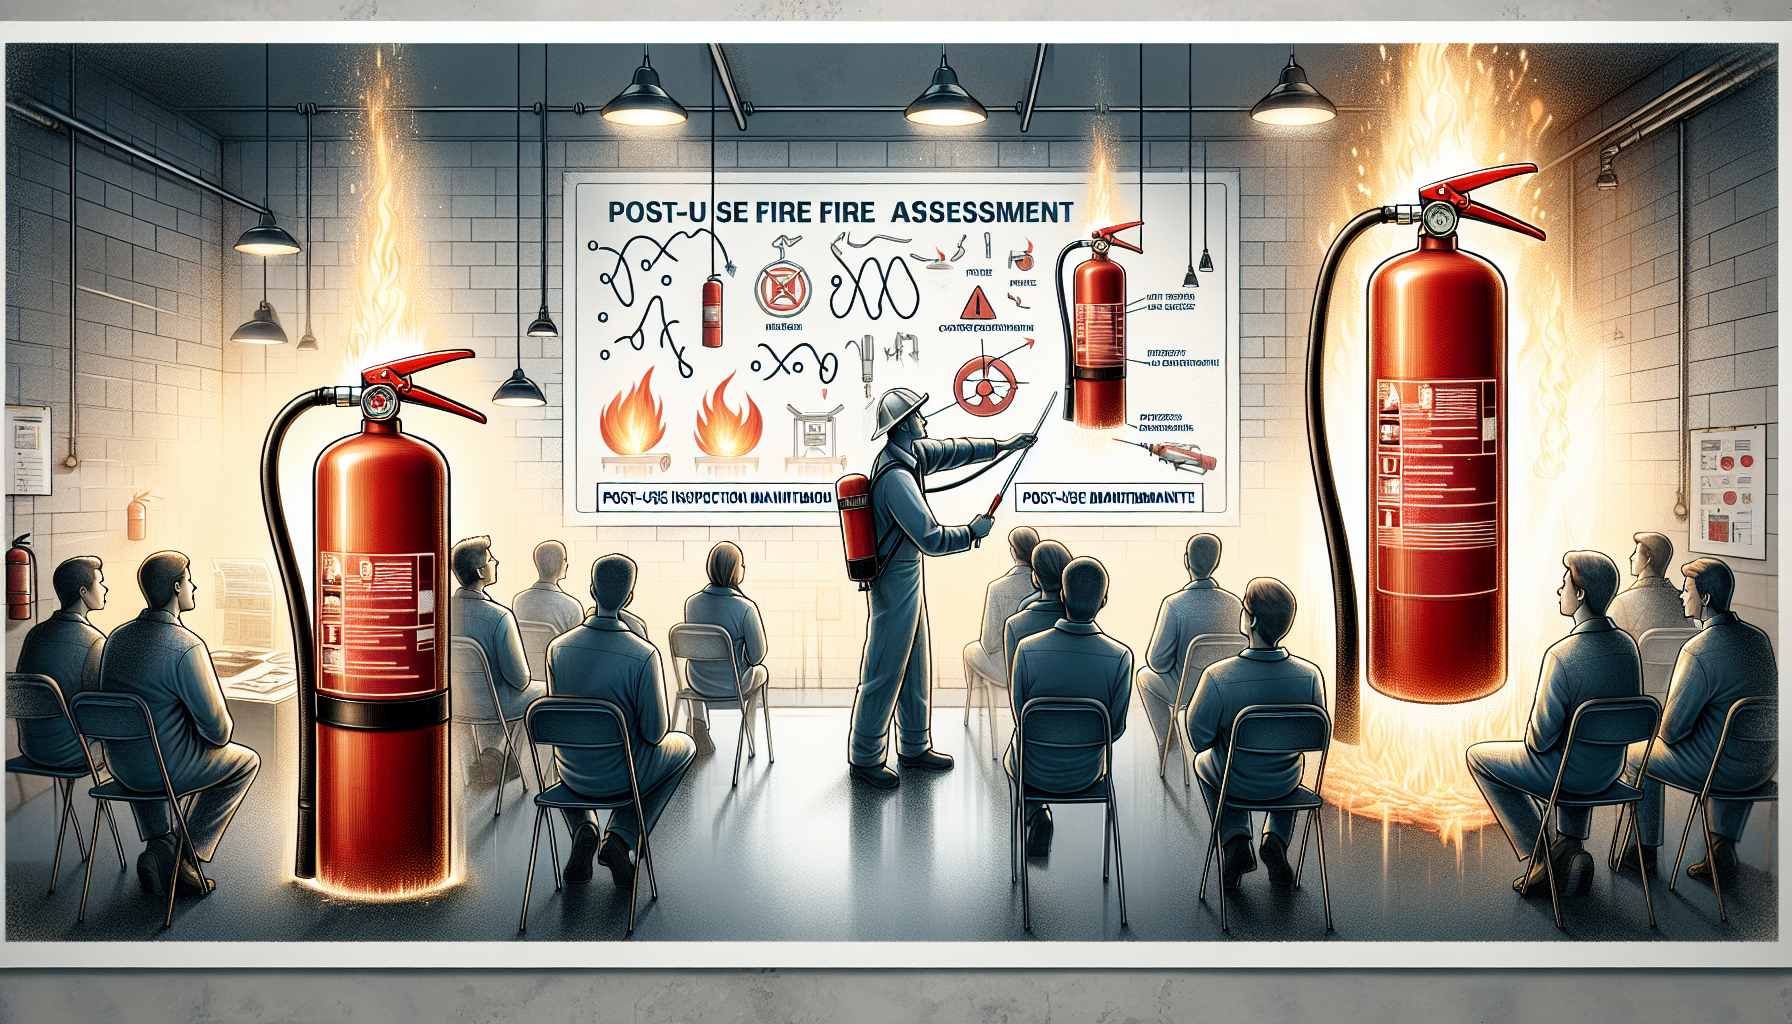 Illustration of conducting a fire extinguisher training session